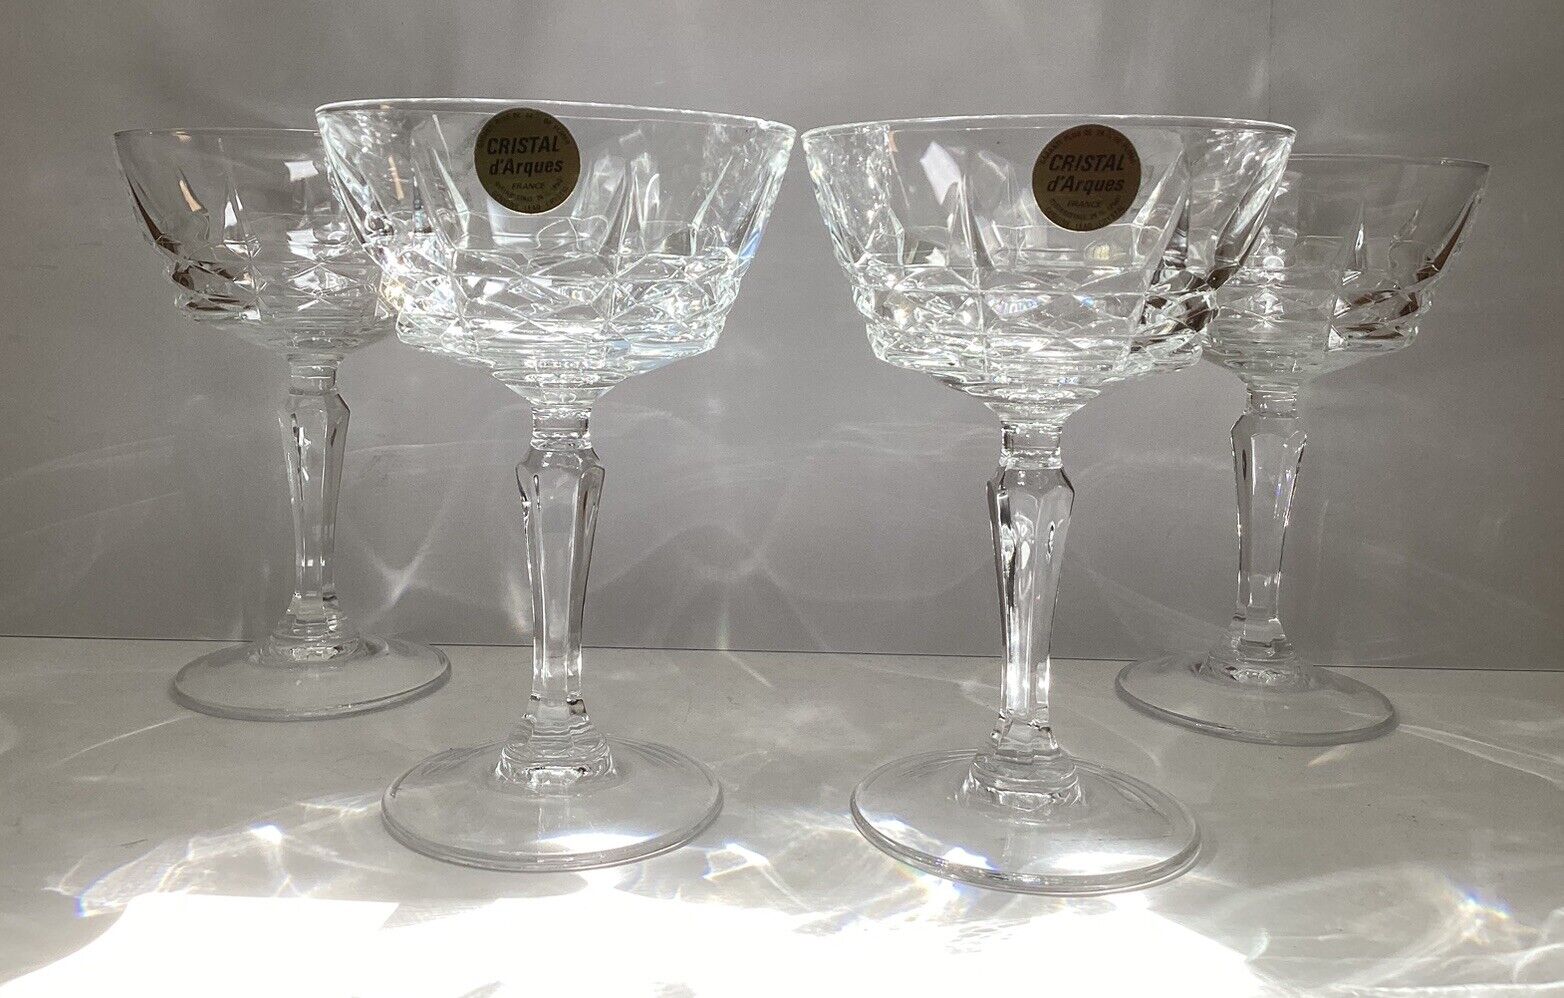 CHERBOURG_French Lead Crystal_4 Champagne Sherbet Glasses_W M Dalton_Made France